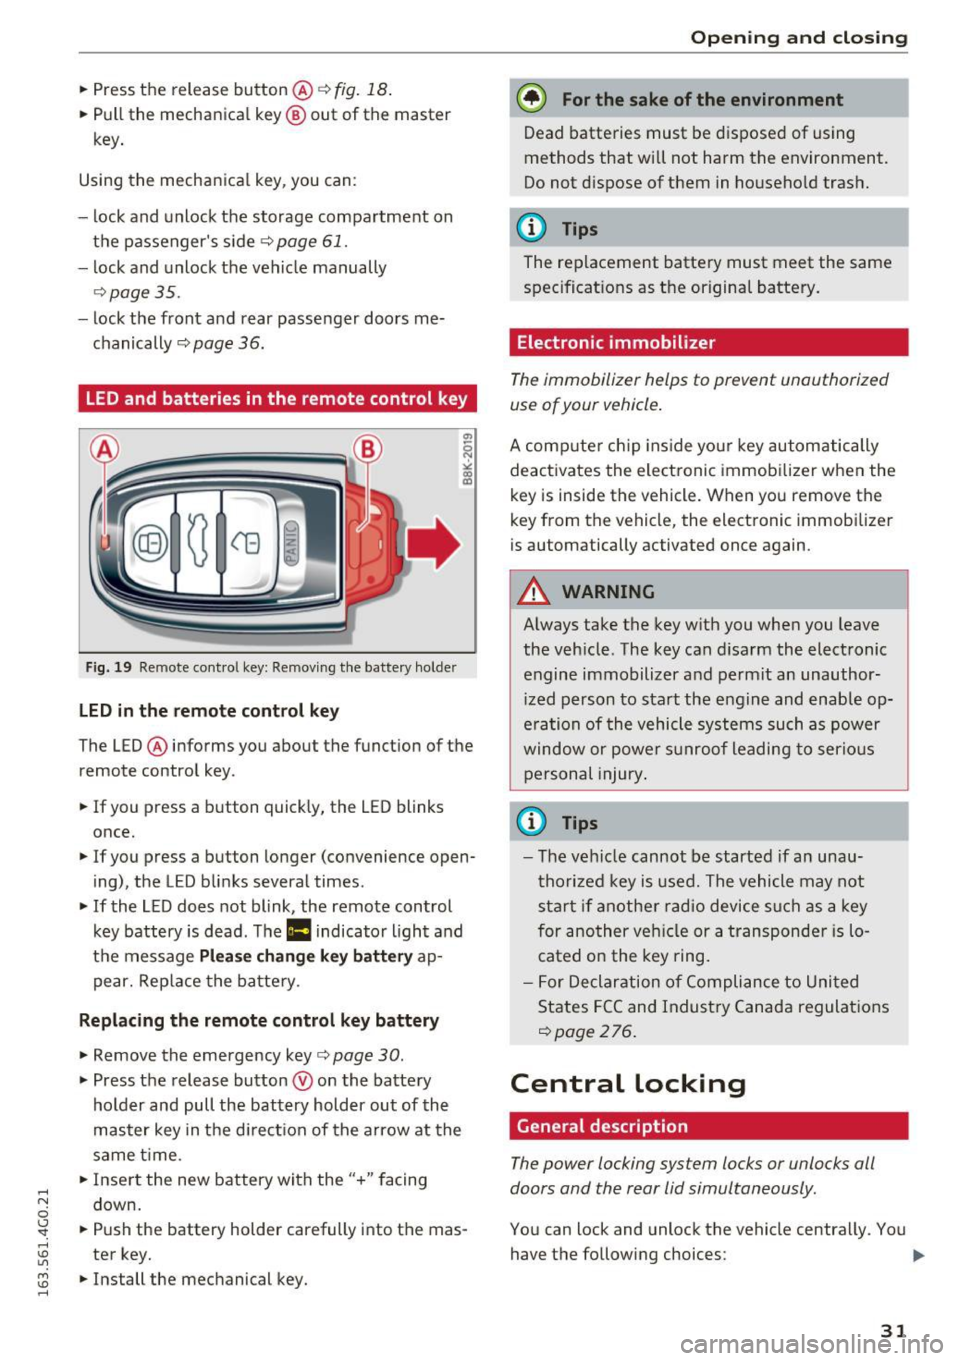 AUDI S6 2016  Owners Manual .... N 
0 CJ <I: .... I.Cl U"I 
M I.Cl ...... 
.. Press  the  release button@ c::> fig.  18. 
.. Pull  the  mechanical  key @ out  of  the  master 
key. 
Using  the mechanical  key , you  can: 
- loc